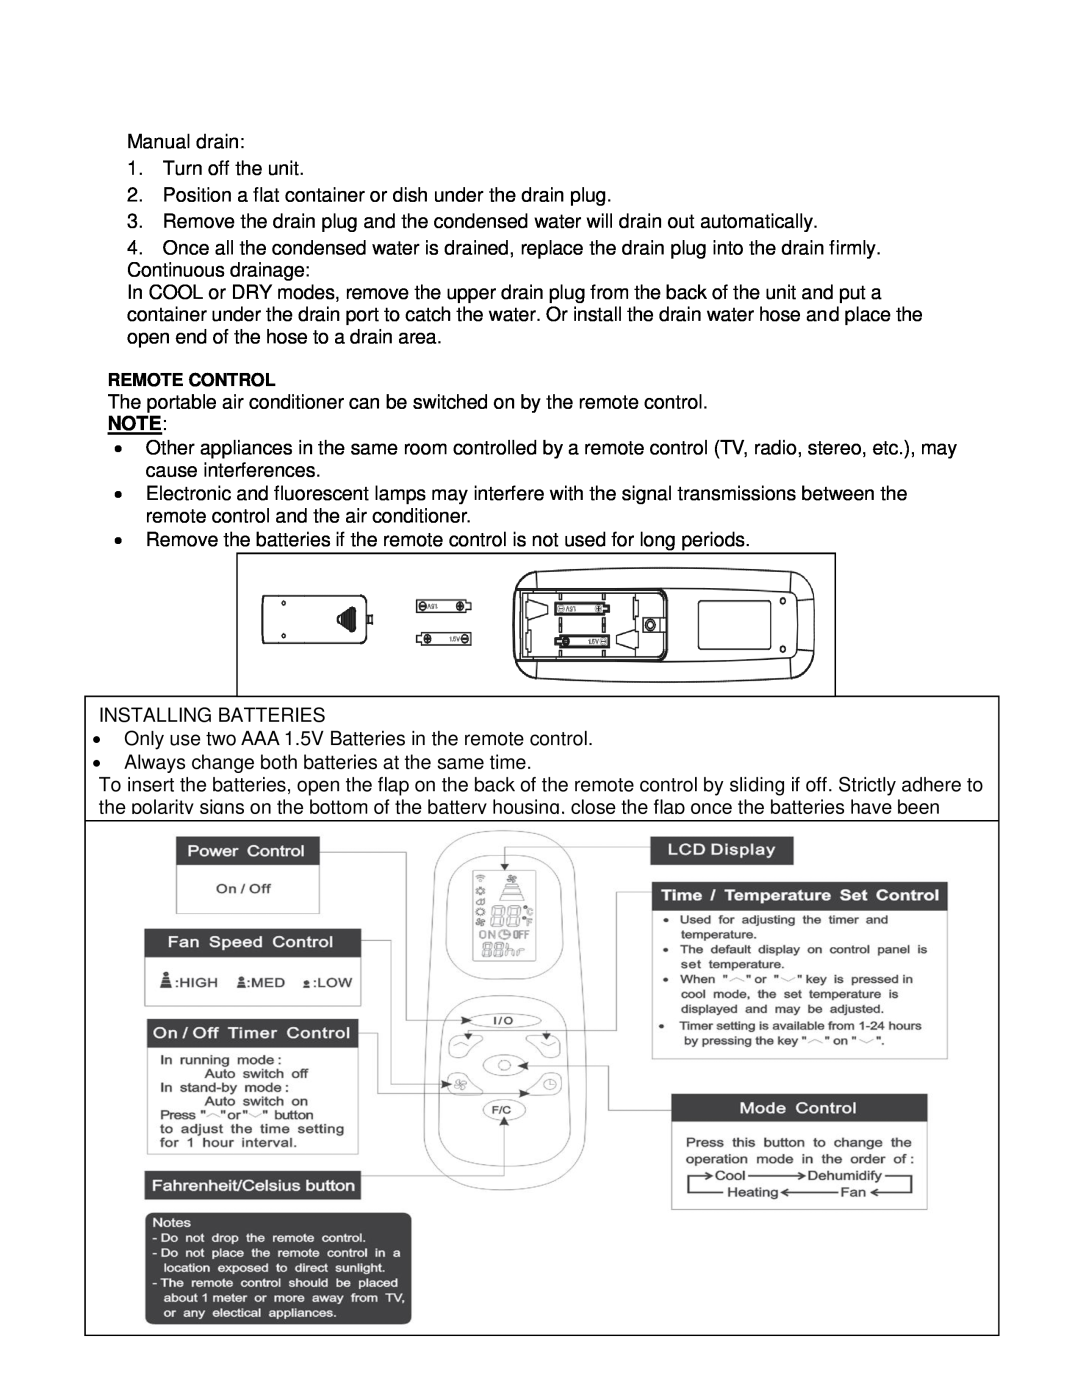 Whynter ARC-12SDH instruction manual Manual drain 1.Turn off the unit 